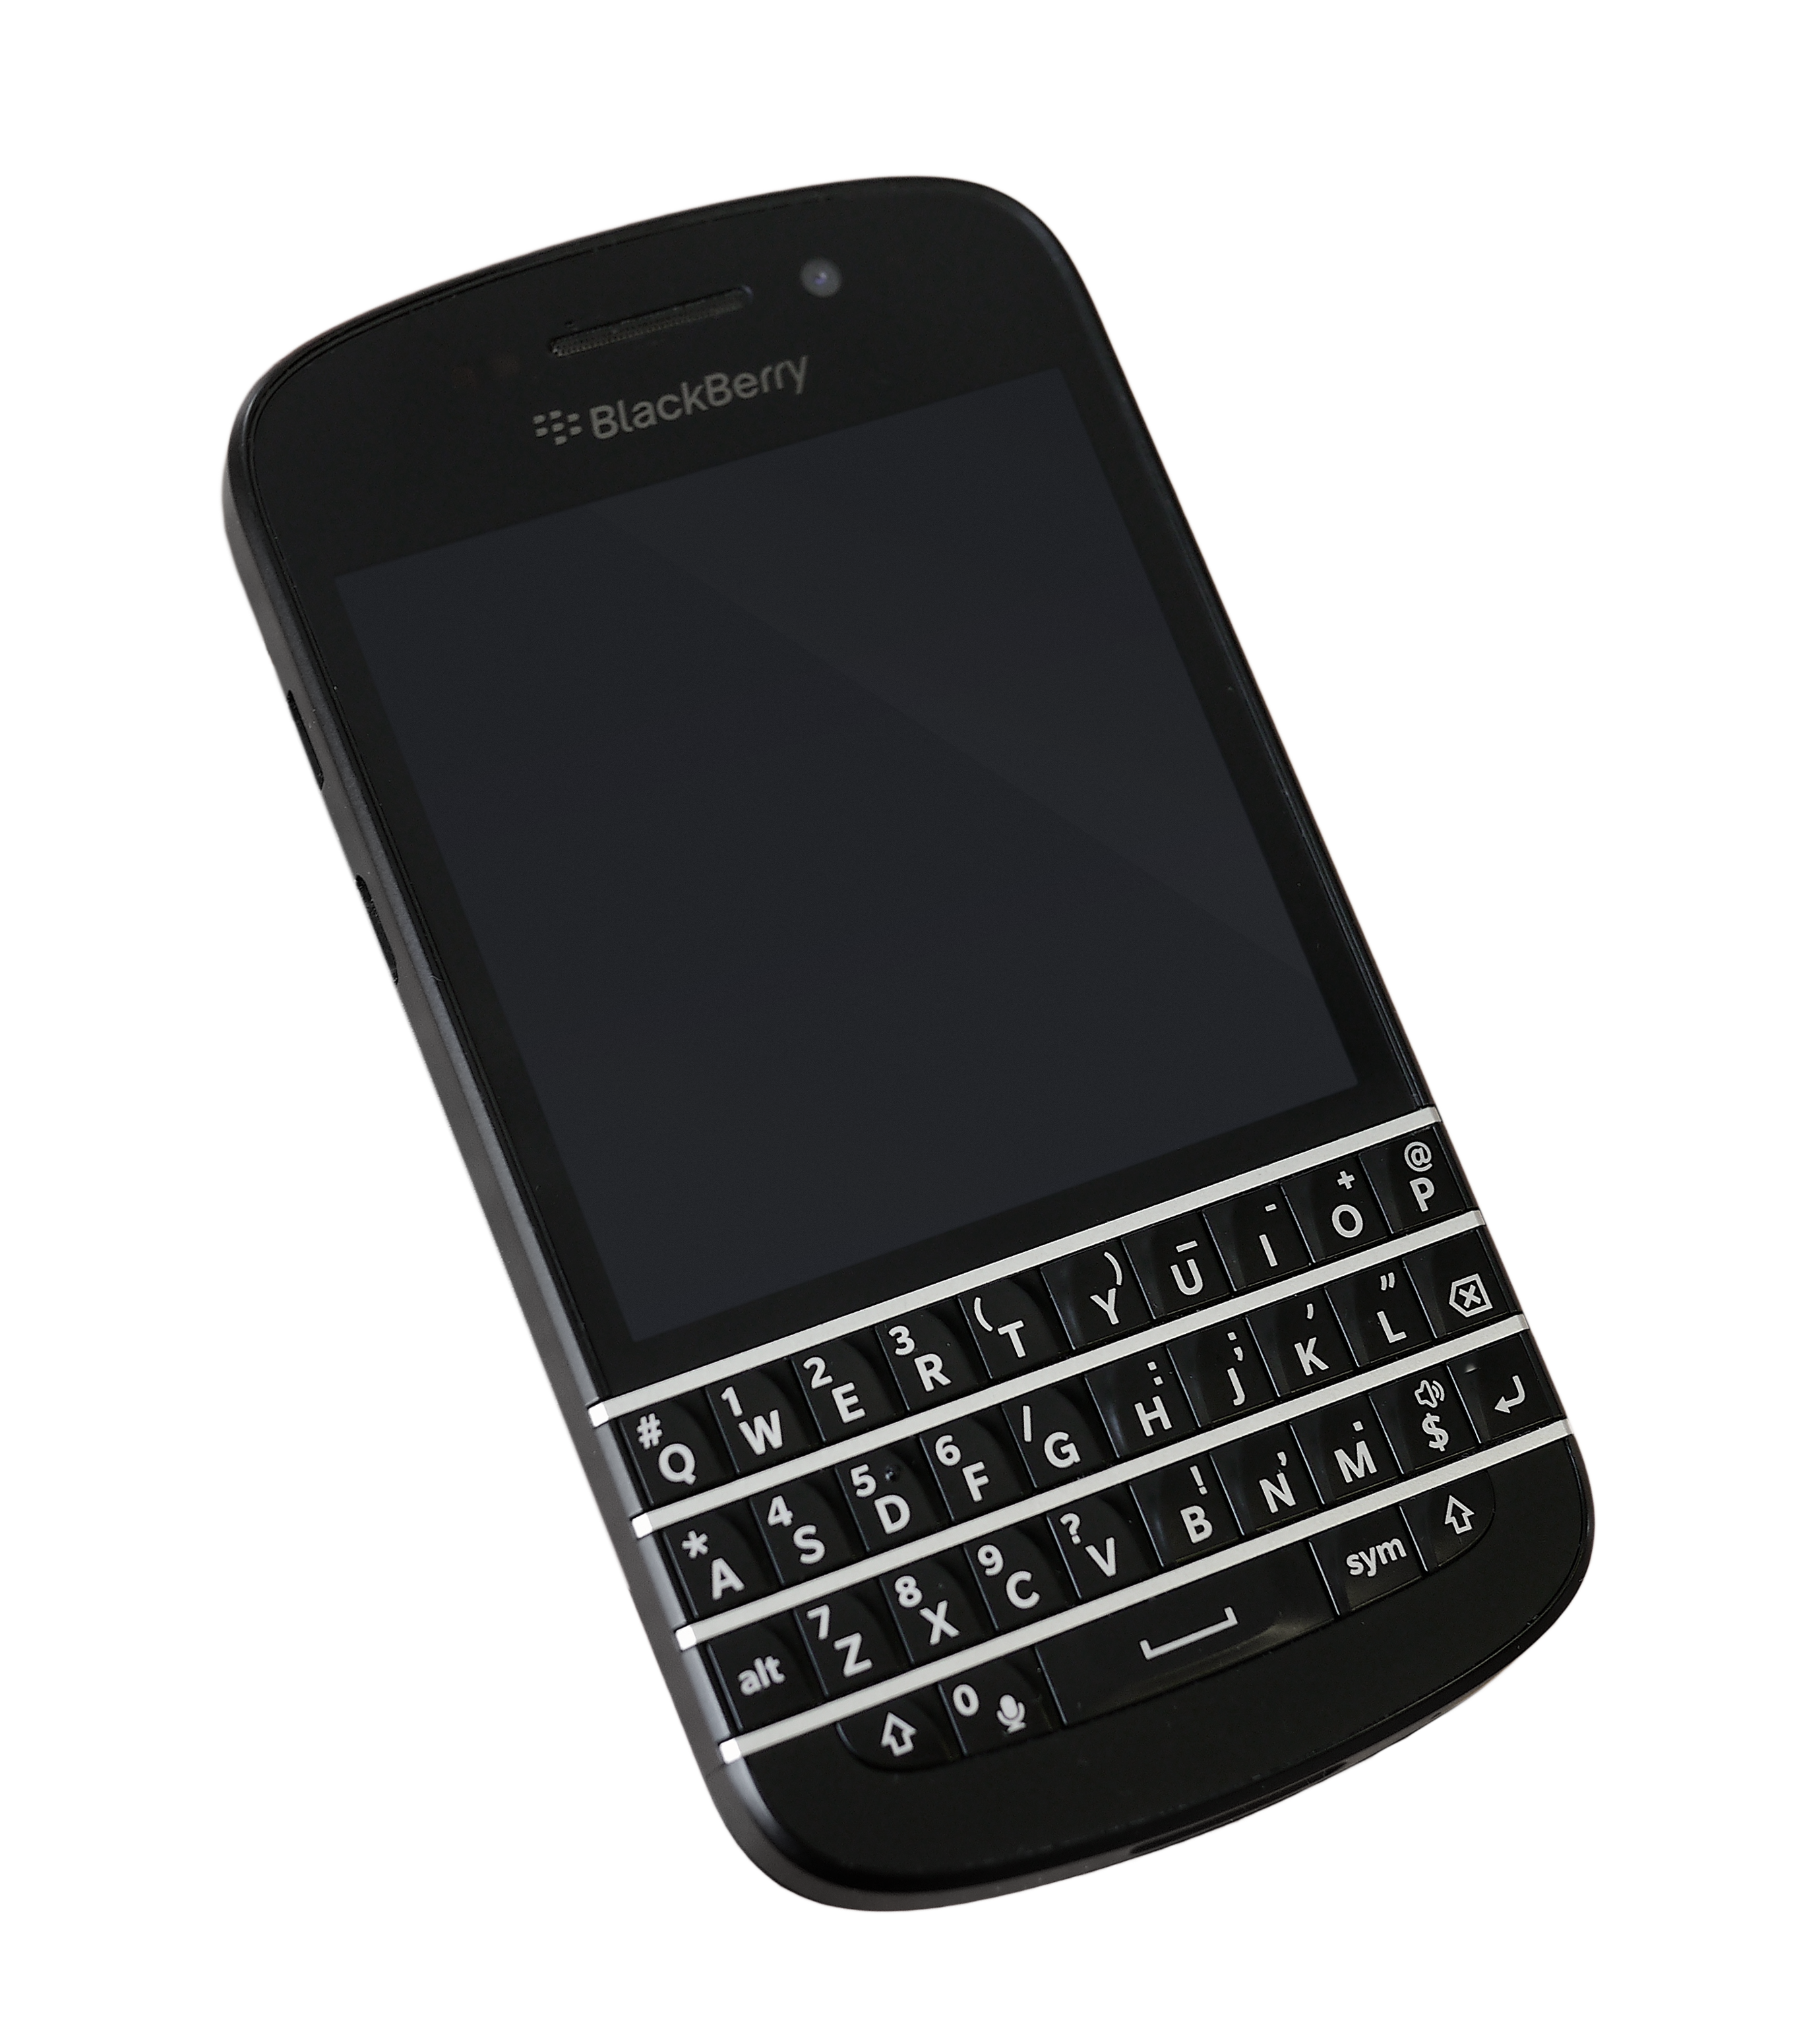 Blackberry Mobile PNG Pic